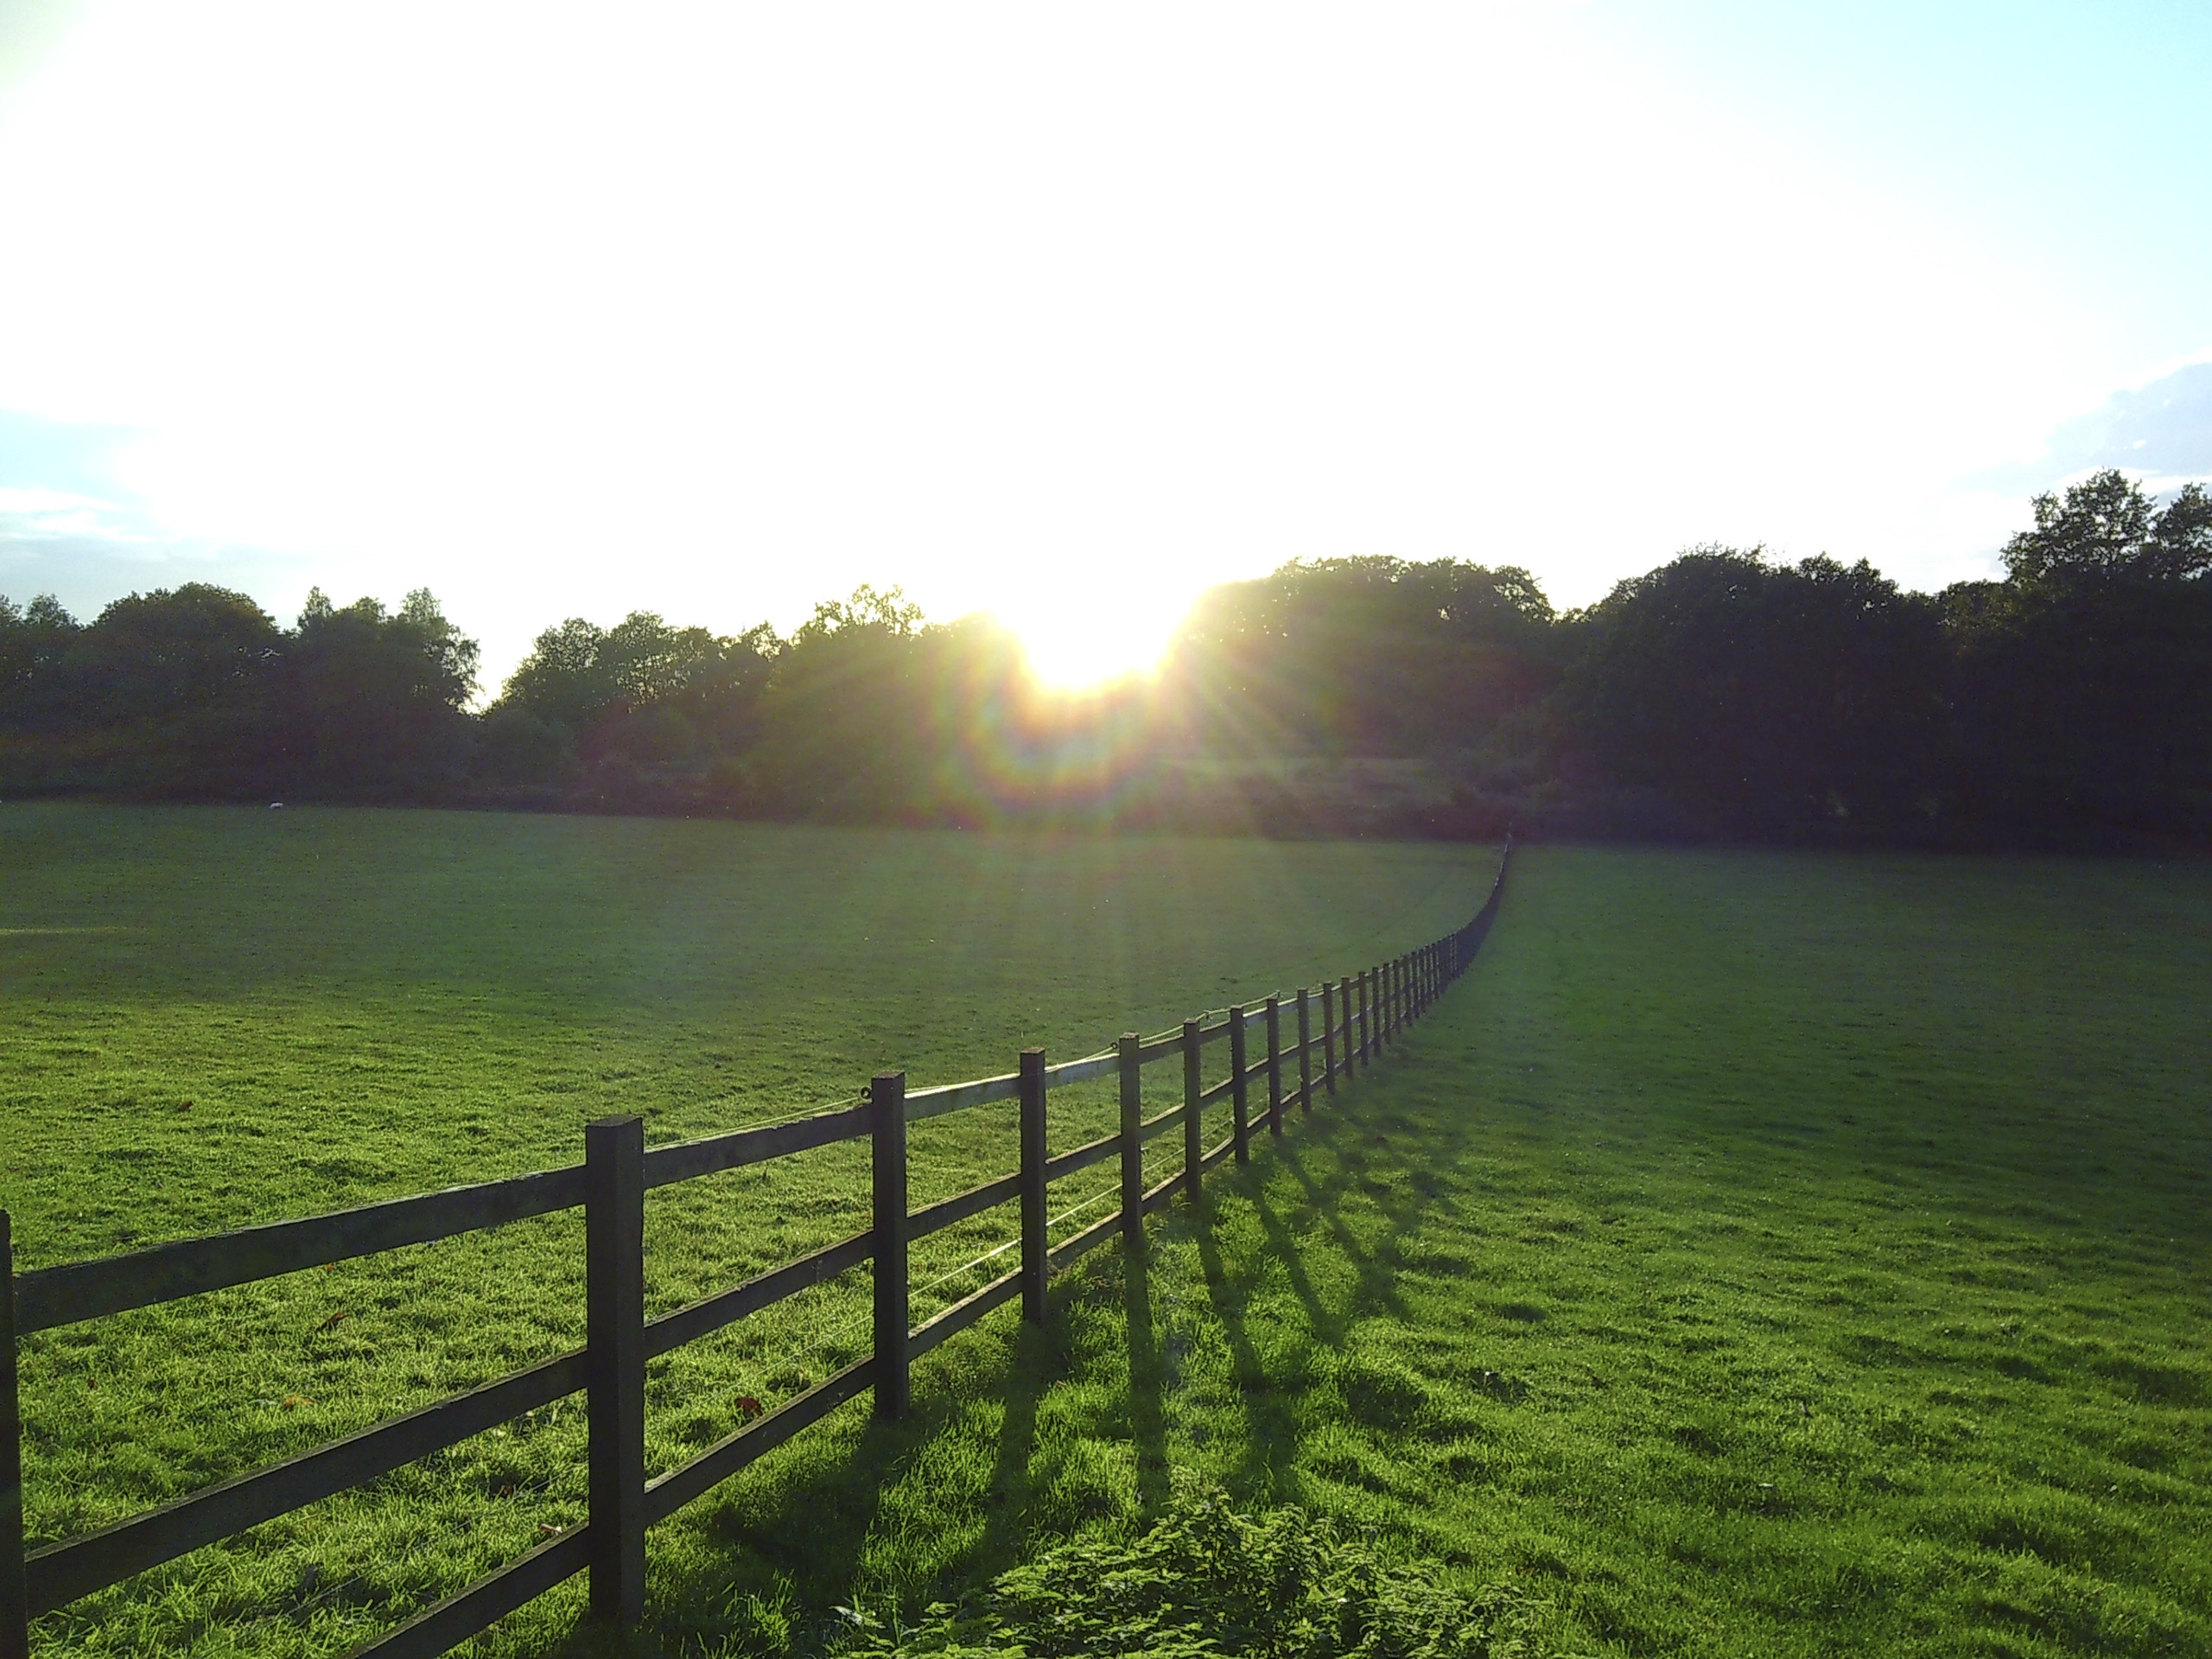 Sunset over field with wooden fence, taken with the Camp Snap camera